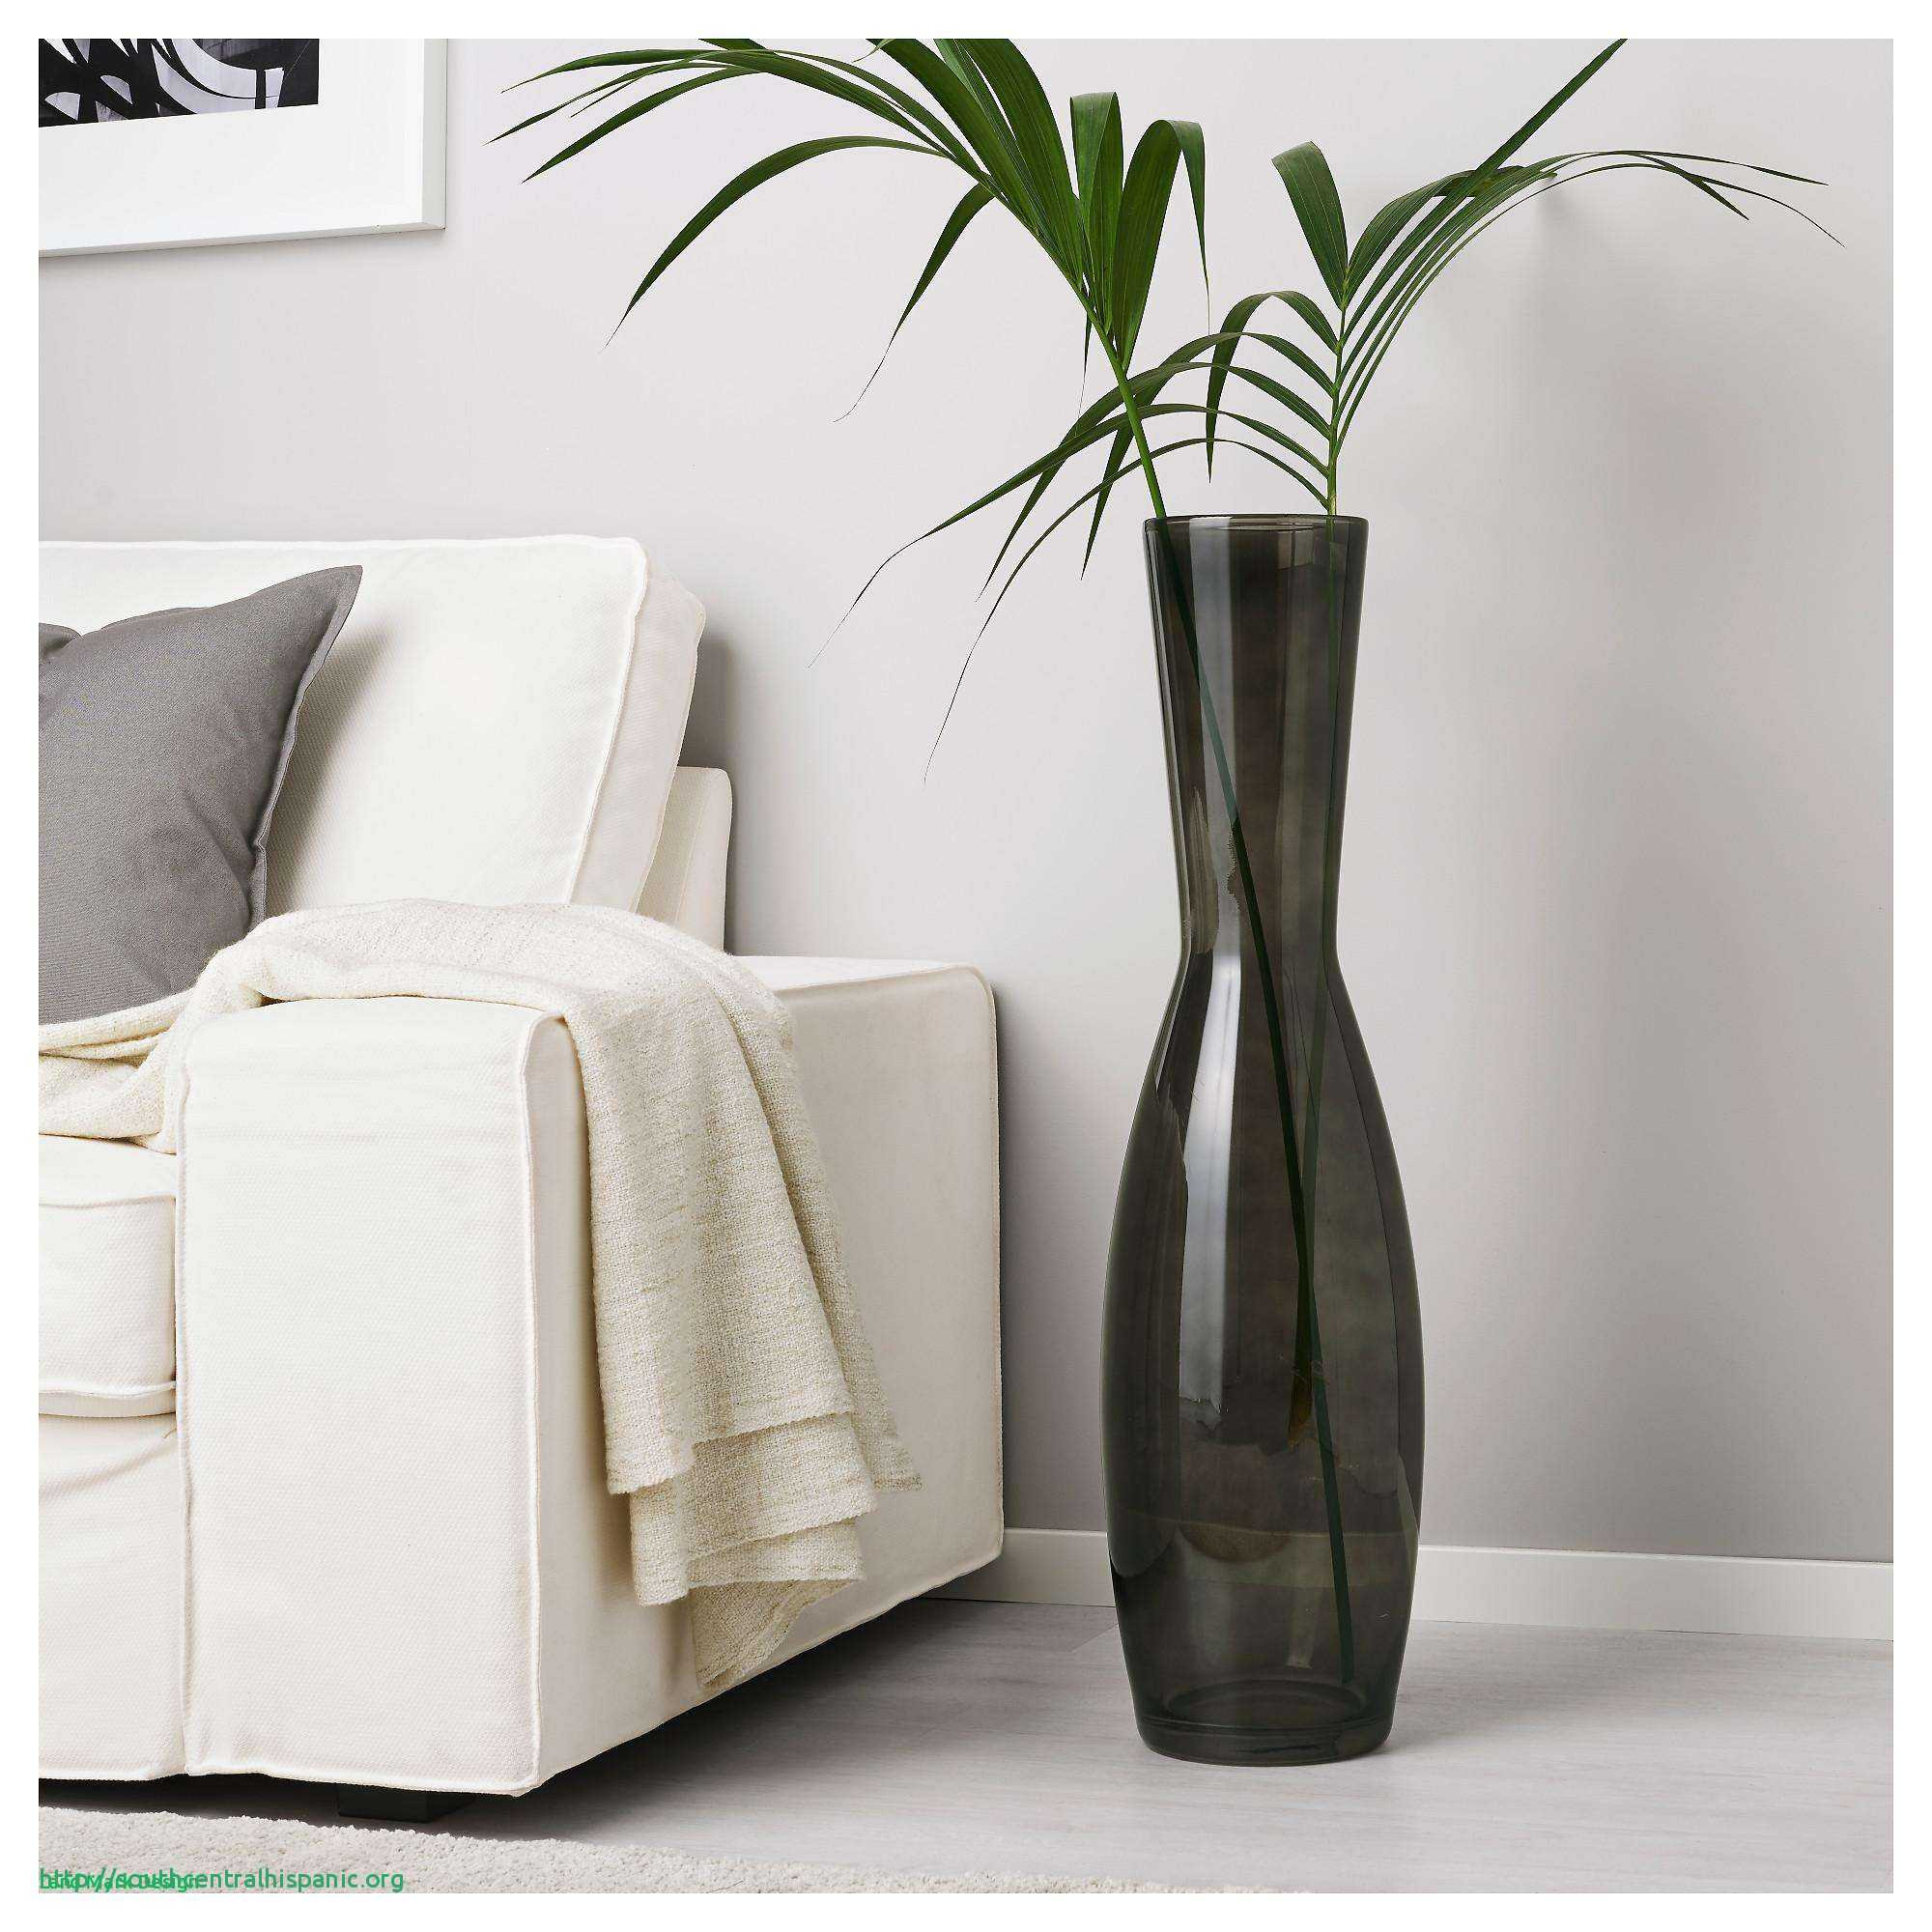 24 Cute Extra Large Ceramic Floor Vases 2022 free download extra large ceramic floor vases of 22 impressionnant what to put in a large floor vase ideas blog with full size of living room concrete vases inspirational ikea floor vases tall large size 